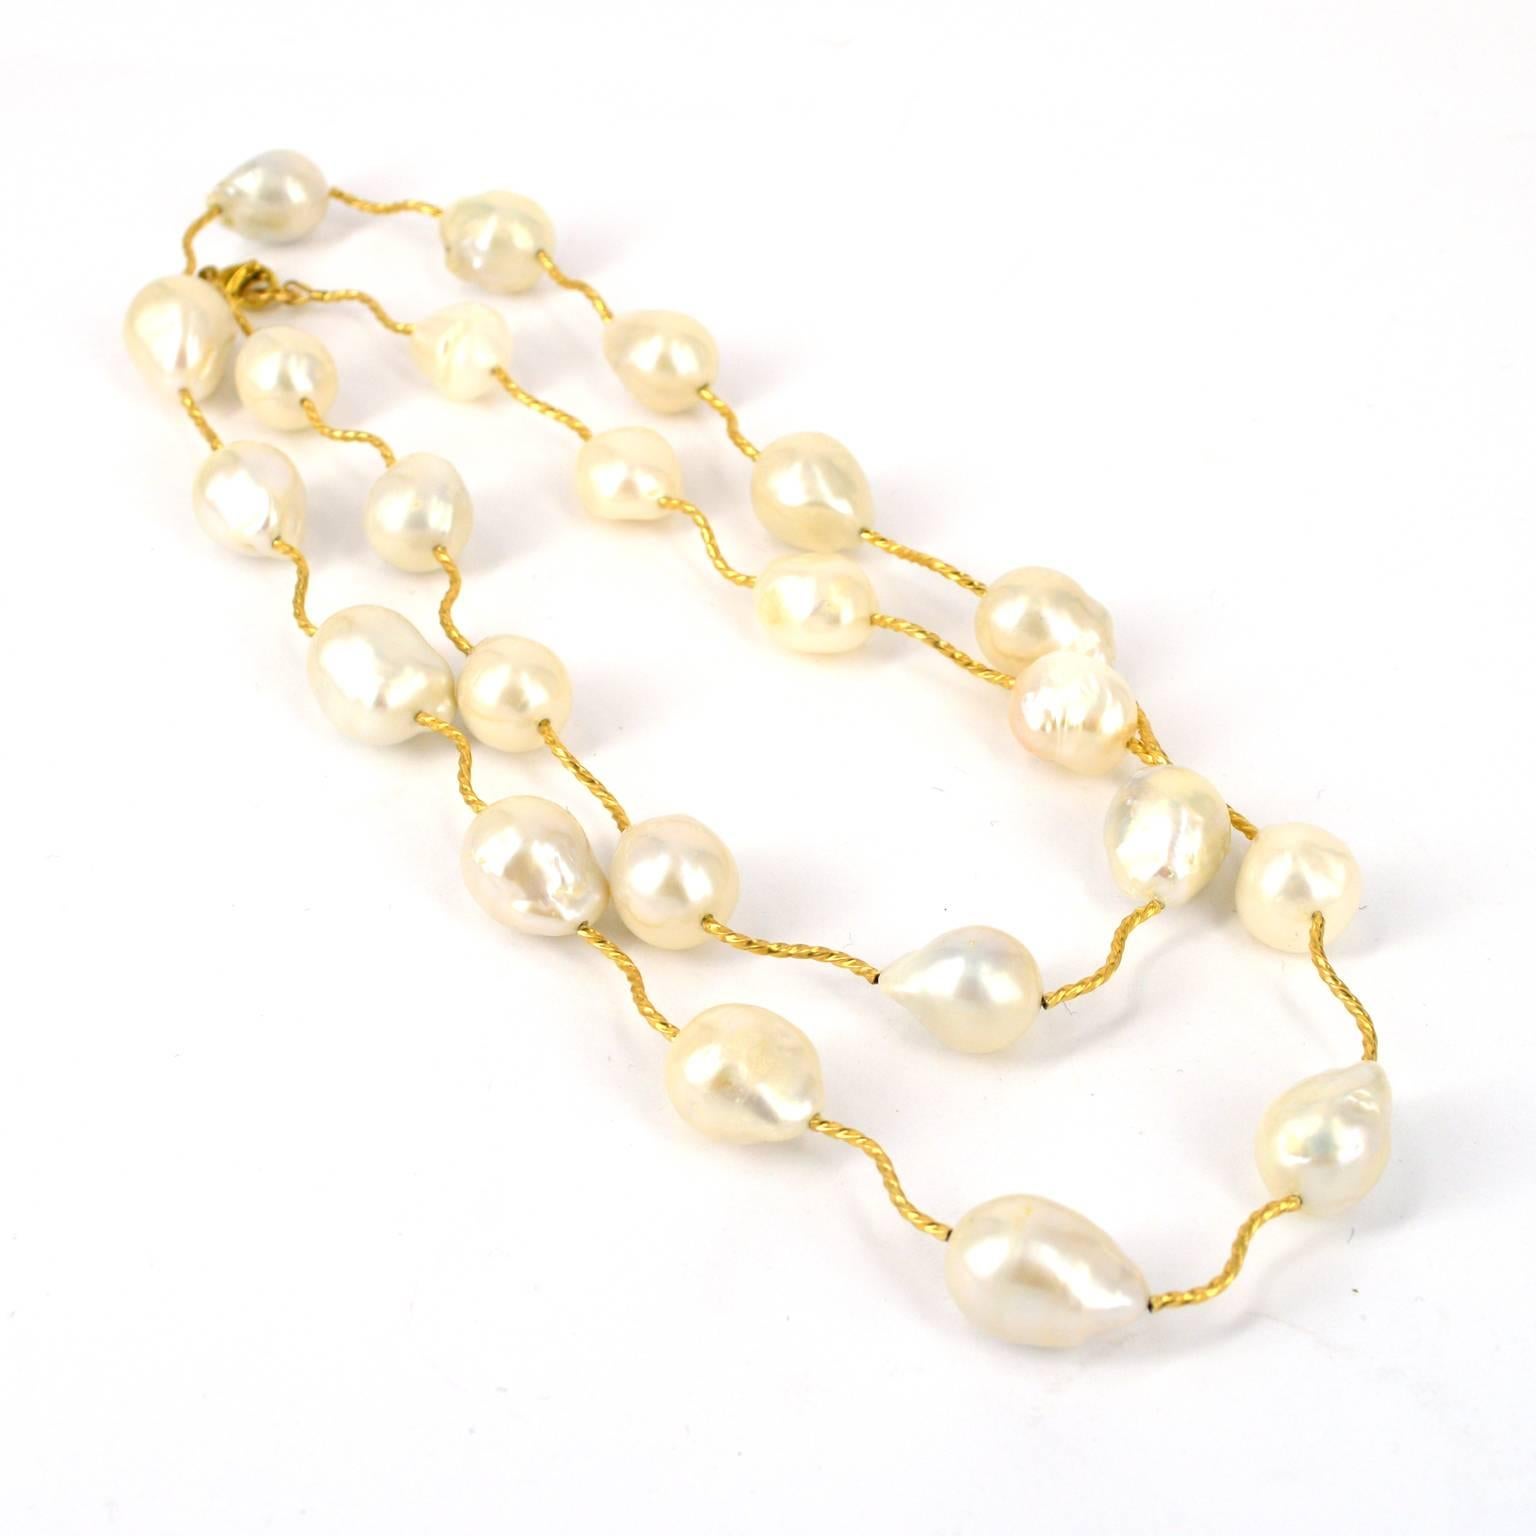 90cm long necklace with Baroque Fresh Water Pearls and 14k gold filled twist tubes. 
Can be worn single or doubled.

Custom modification available on request
